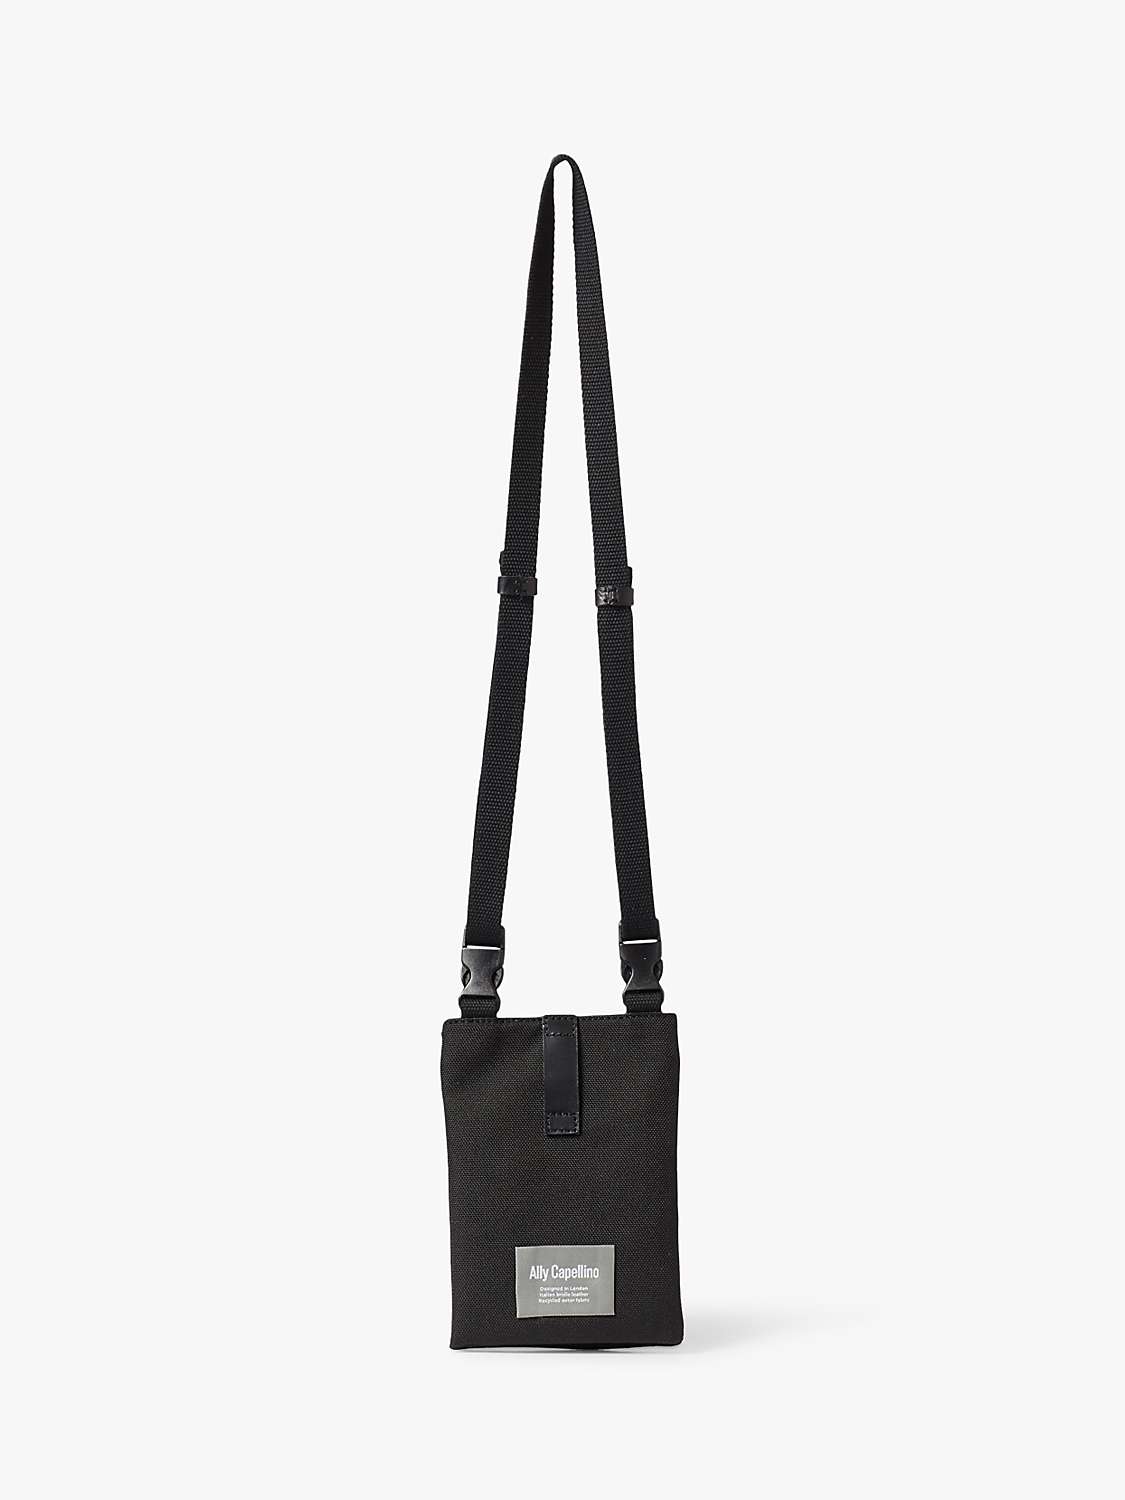 Buy Ally Capellino Hoban Travel Cycle Phone Pouch Bag Online at johnlewis.com